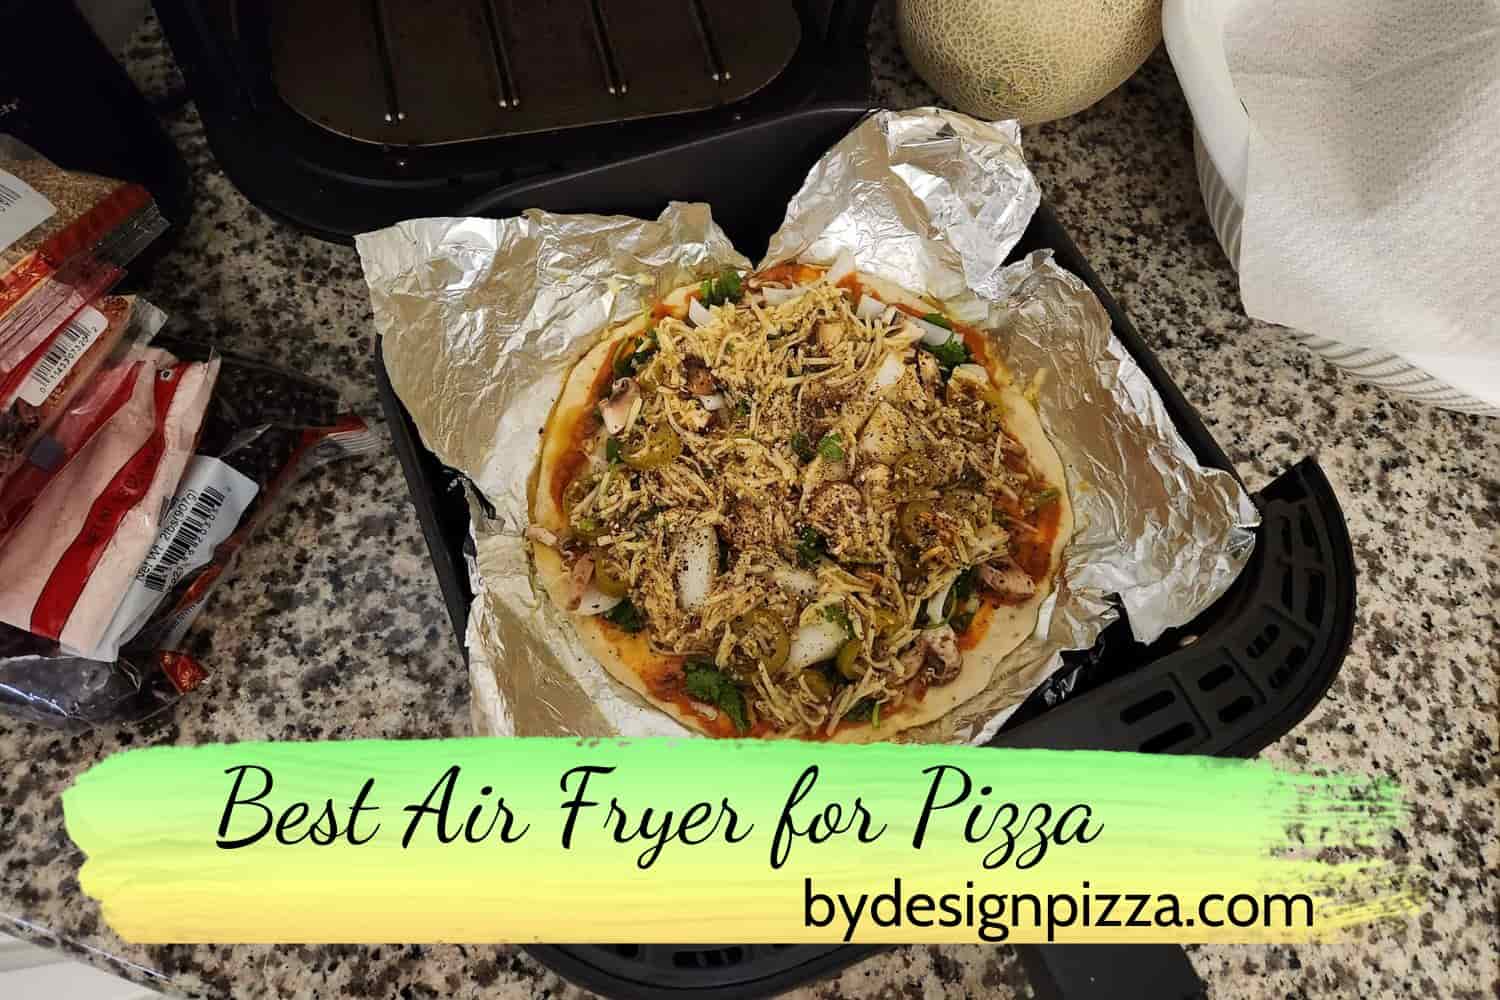 Best Air Fryer for Pizza